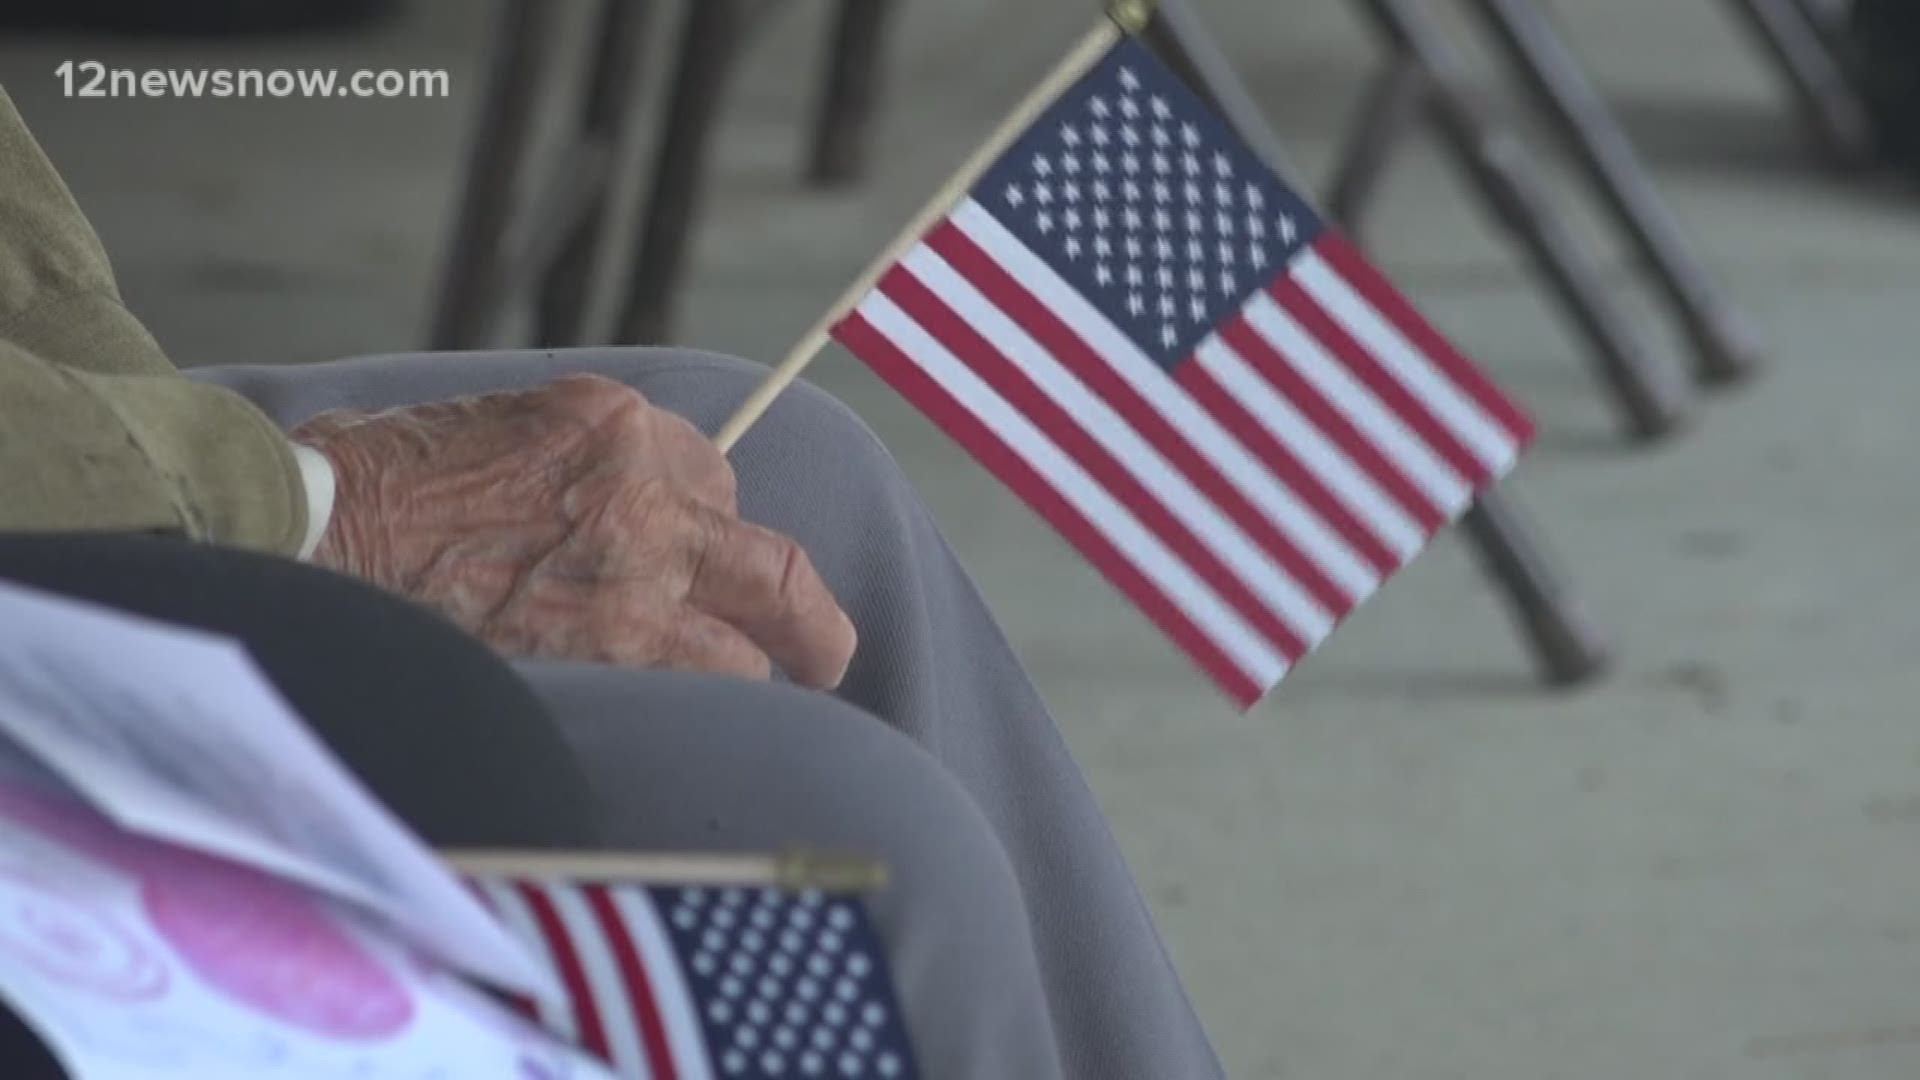 Celebrations took place across the area to honor veterans that served in the U.S. Armed Forces.